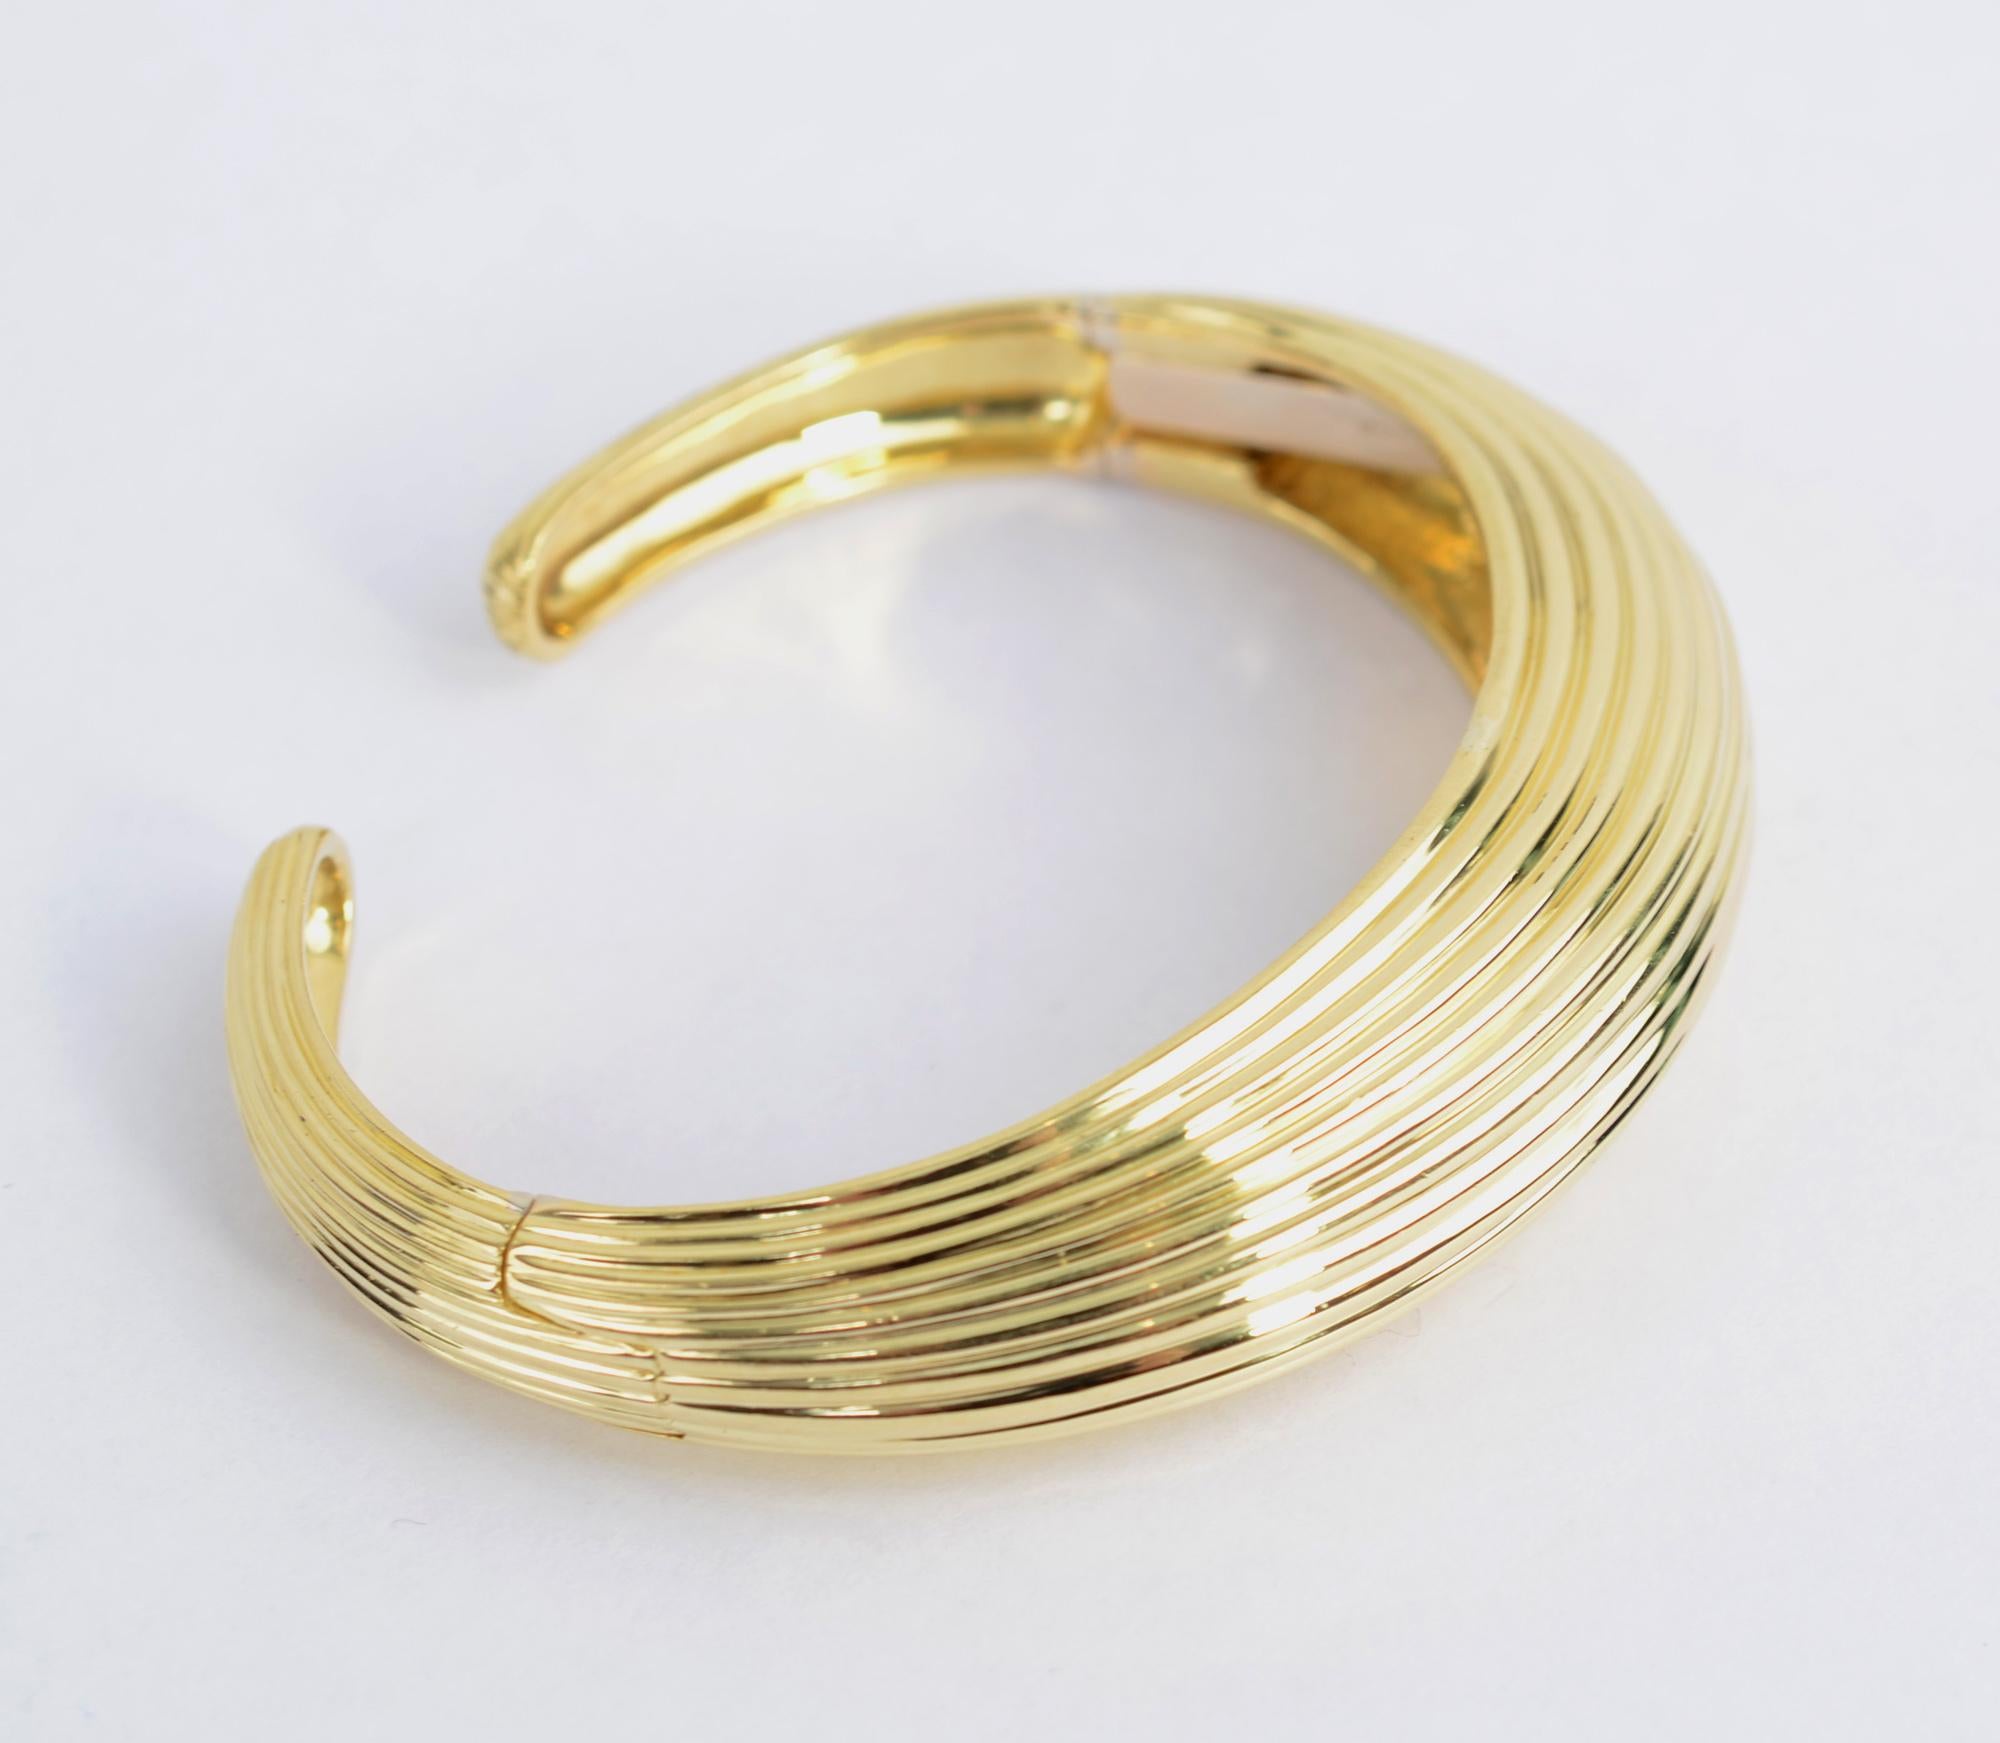 Tiffany 18 karat gold cuff bracelet with ribbed design. The bracelet has two hinges for easy on and off. The front of the bracelet is half an inch tall and 3/4